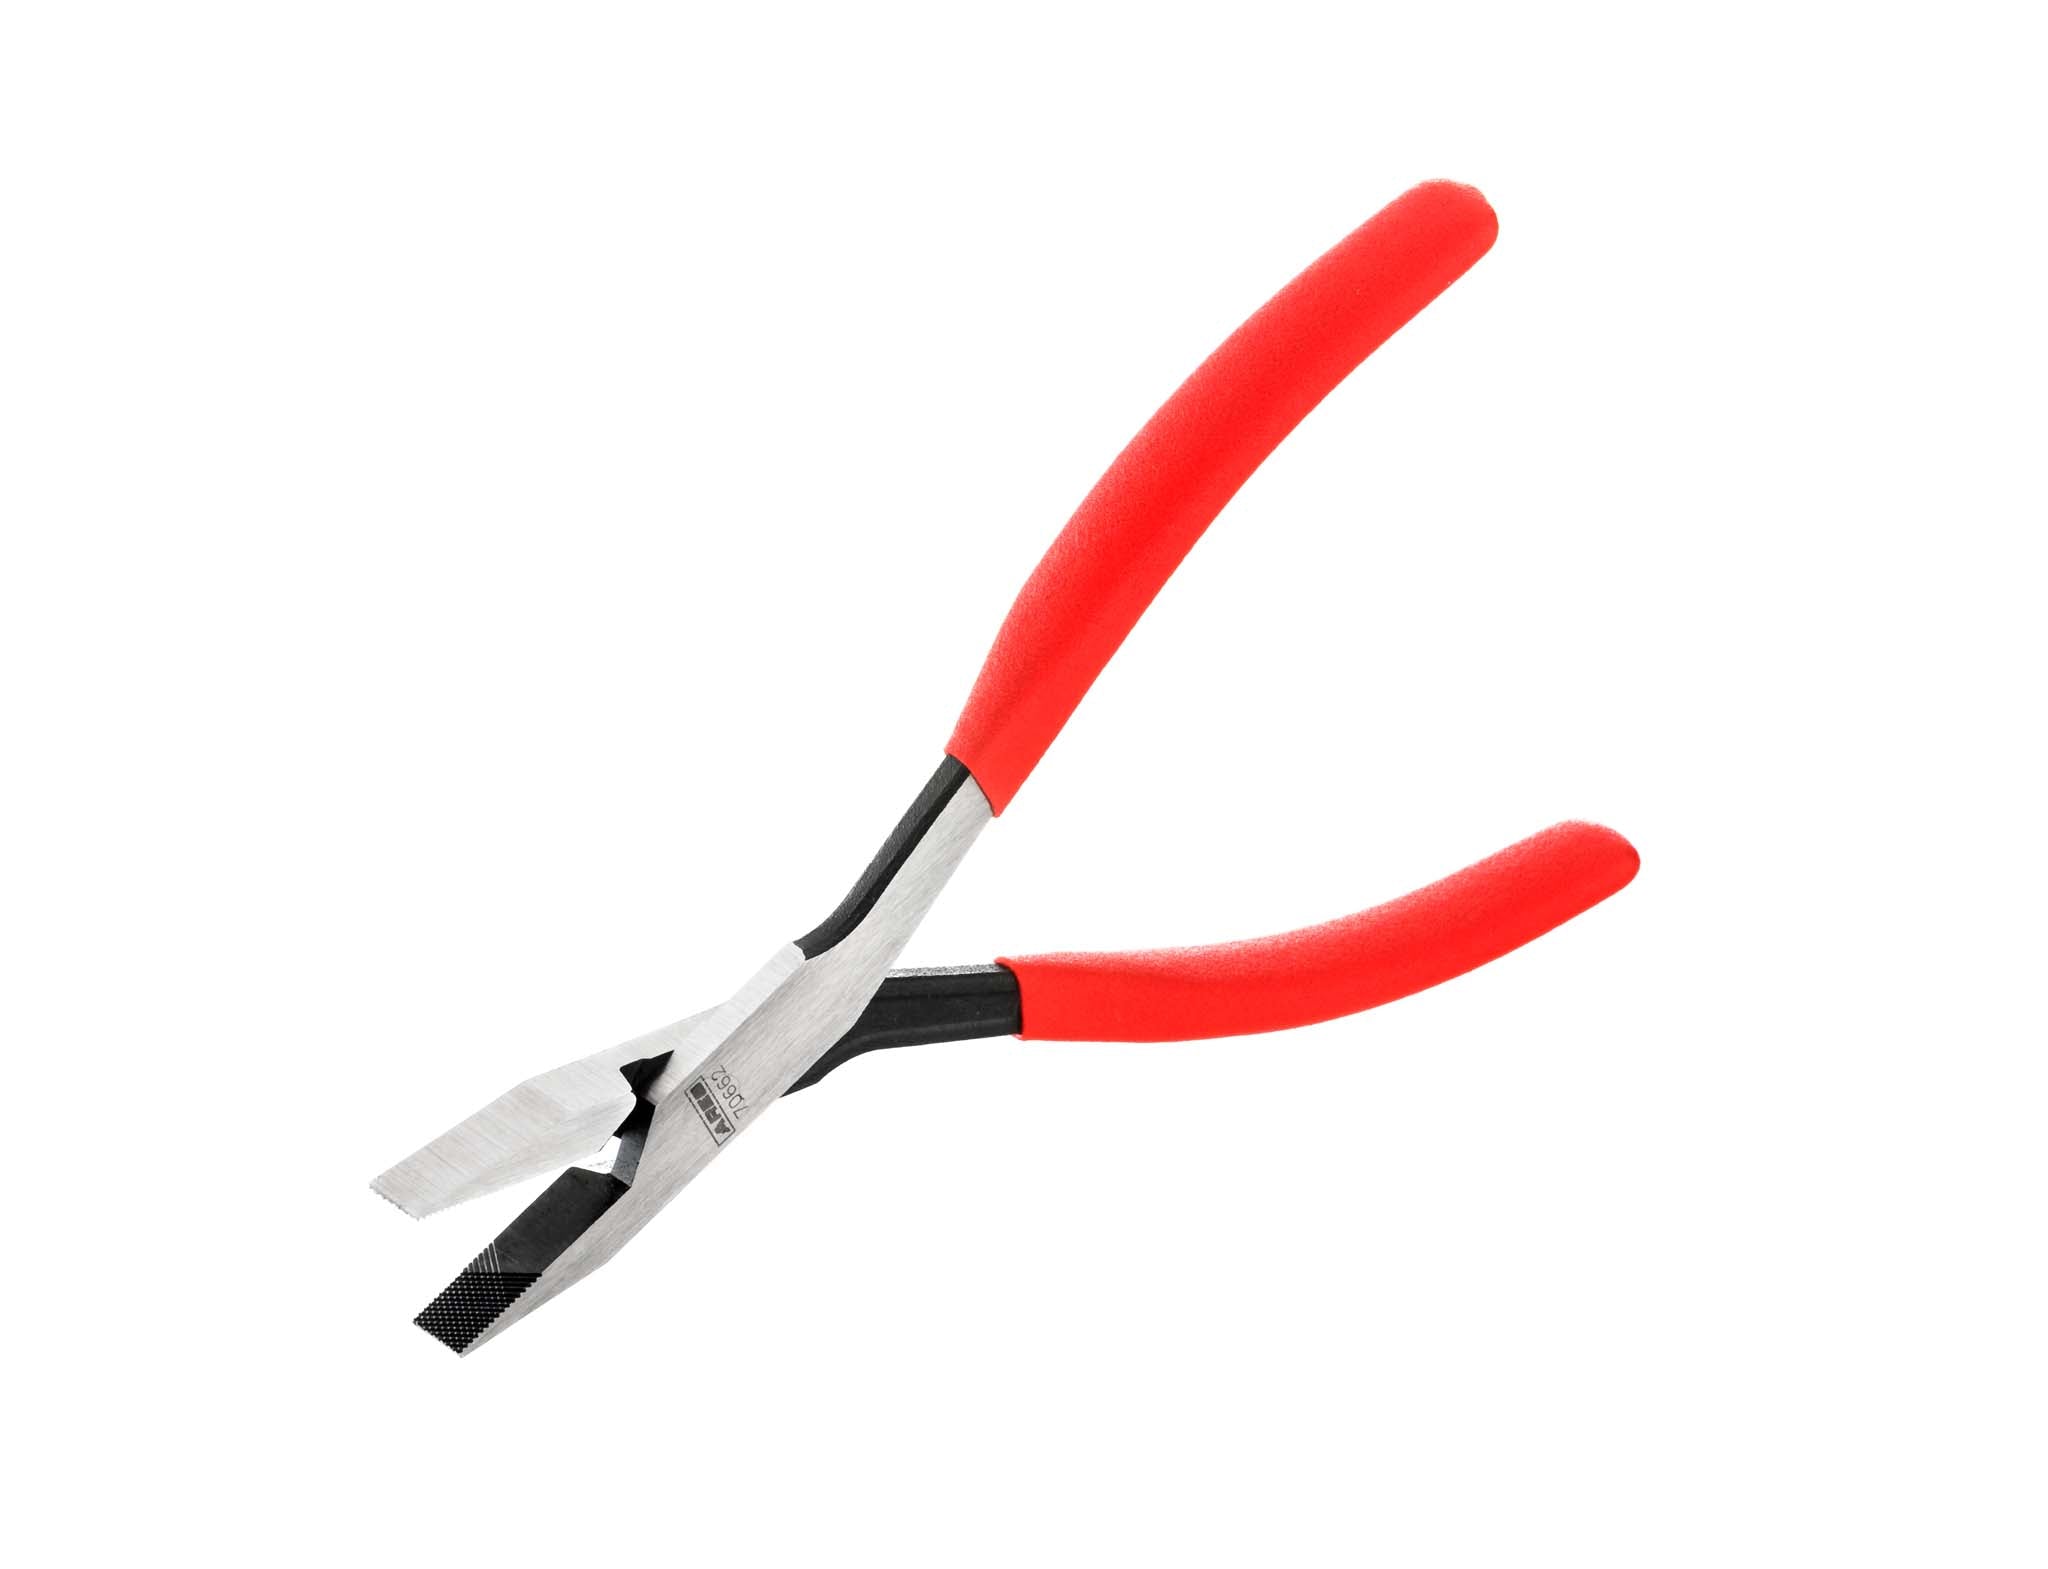 Excelta Flat Nose Pliers Duck bill nose; Smooth jaw; Overall